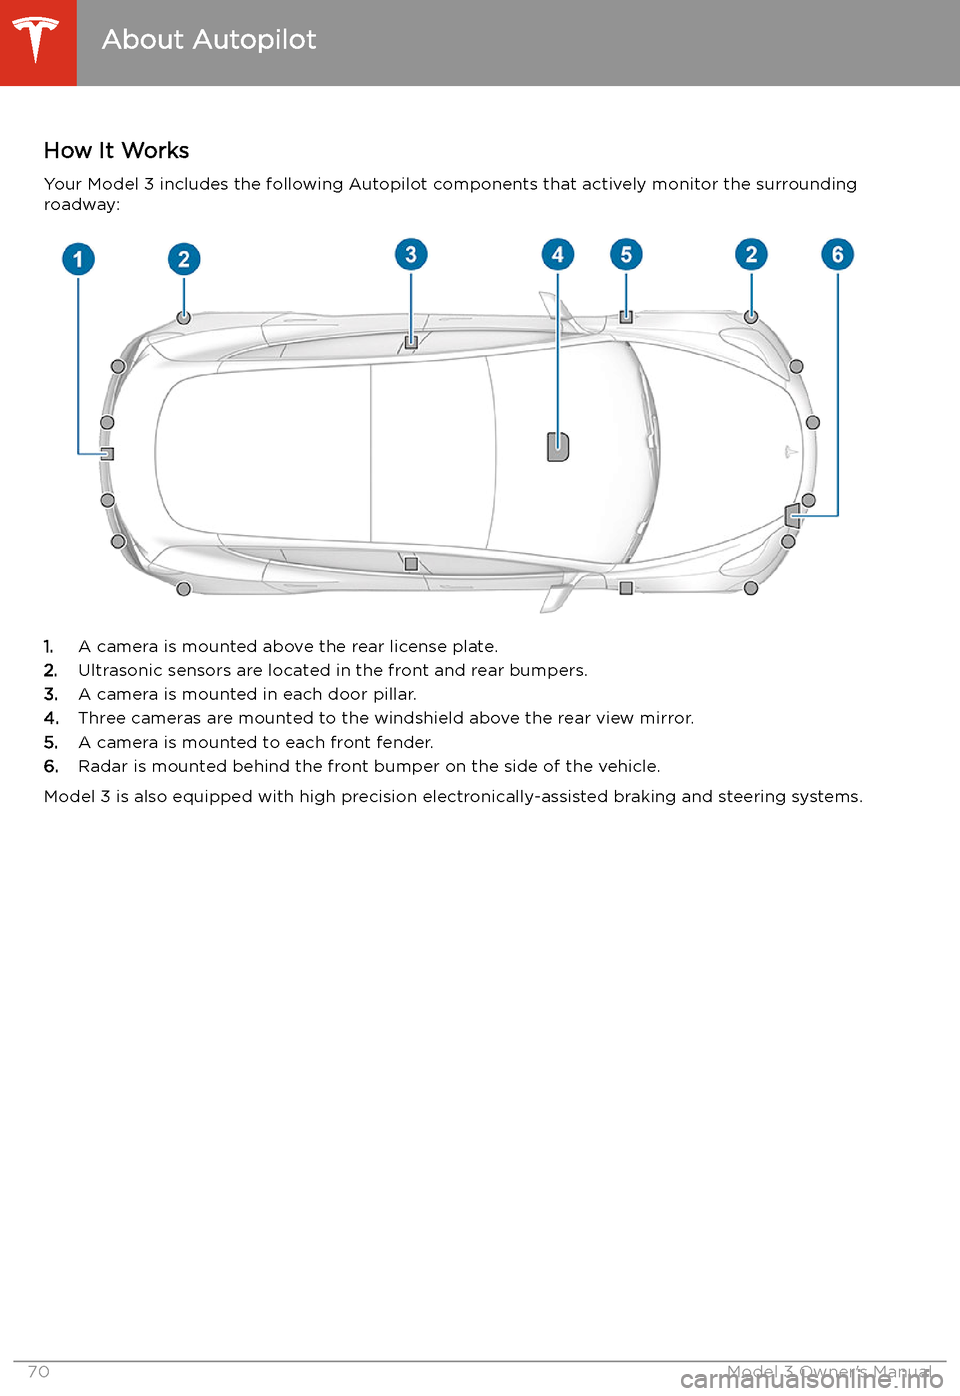 TESLA MODEL 3 2019   (Europe) Manual PDF Autopilot
About Autopilot
How It Works Your Model 3 includes the following Autopilot components that actively monitor the surrounding
roadway:
1. A camera is mounted above the rear license plate.
2. U